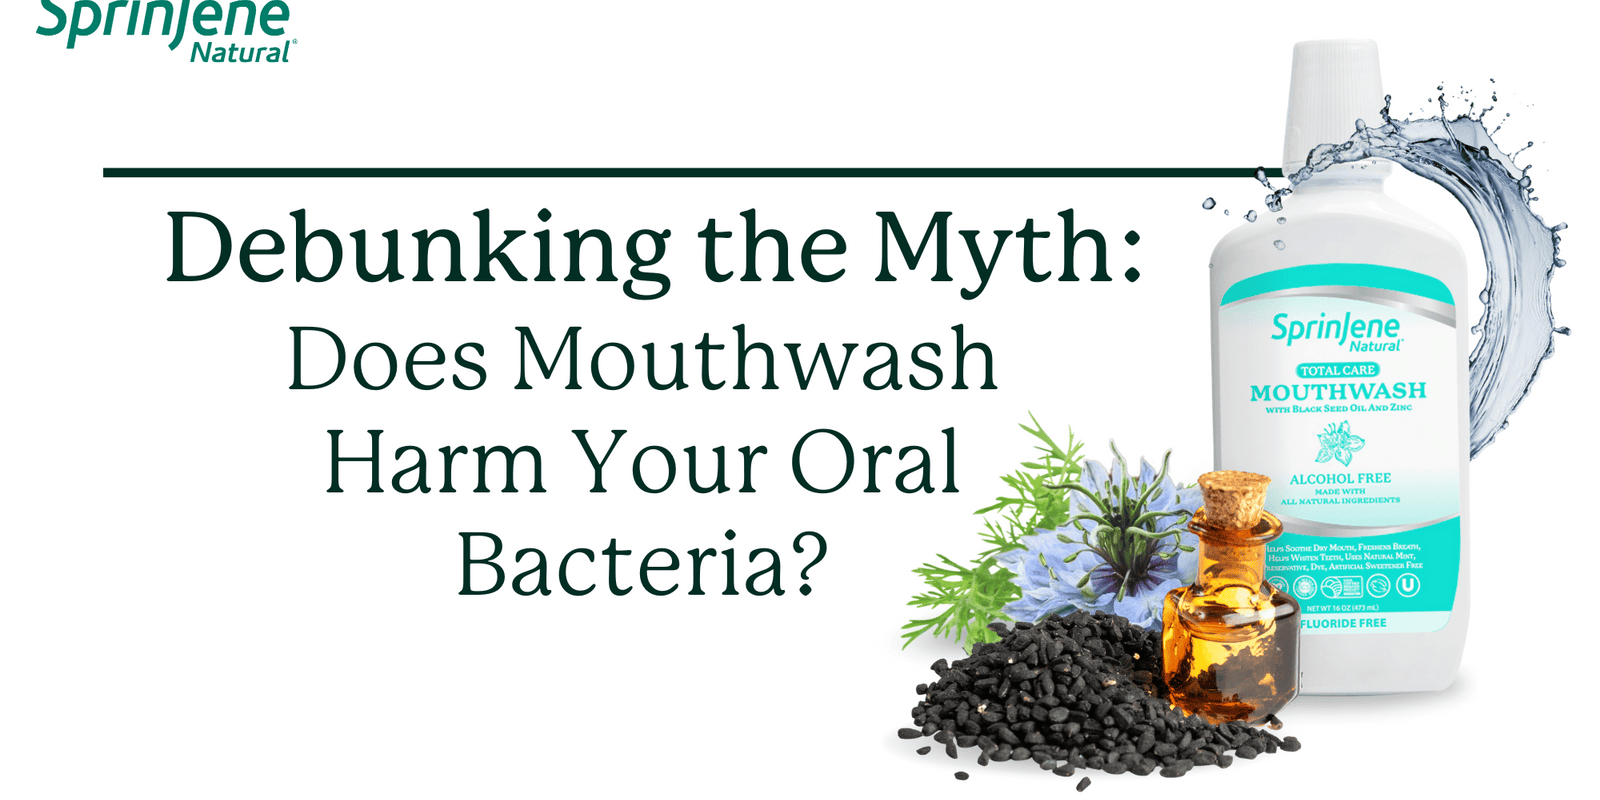 Debunking the Myth: Does Mouthwash Affect Oral Bacteria?